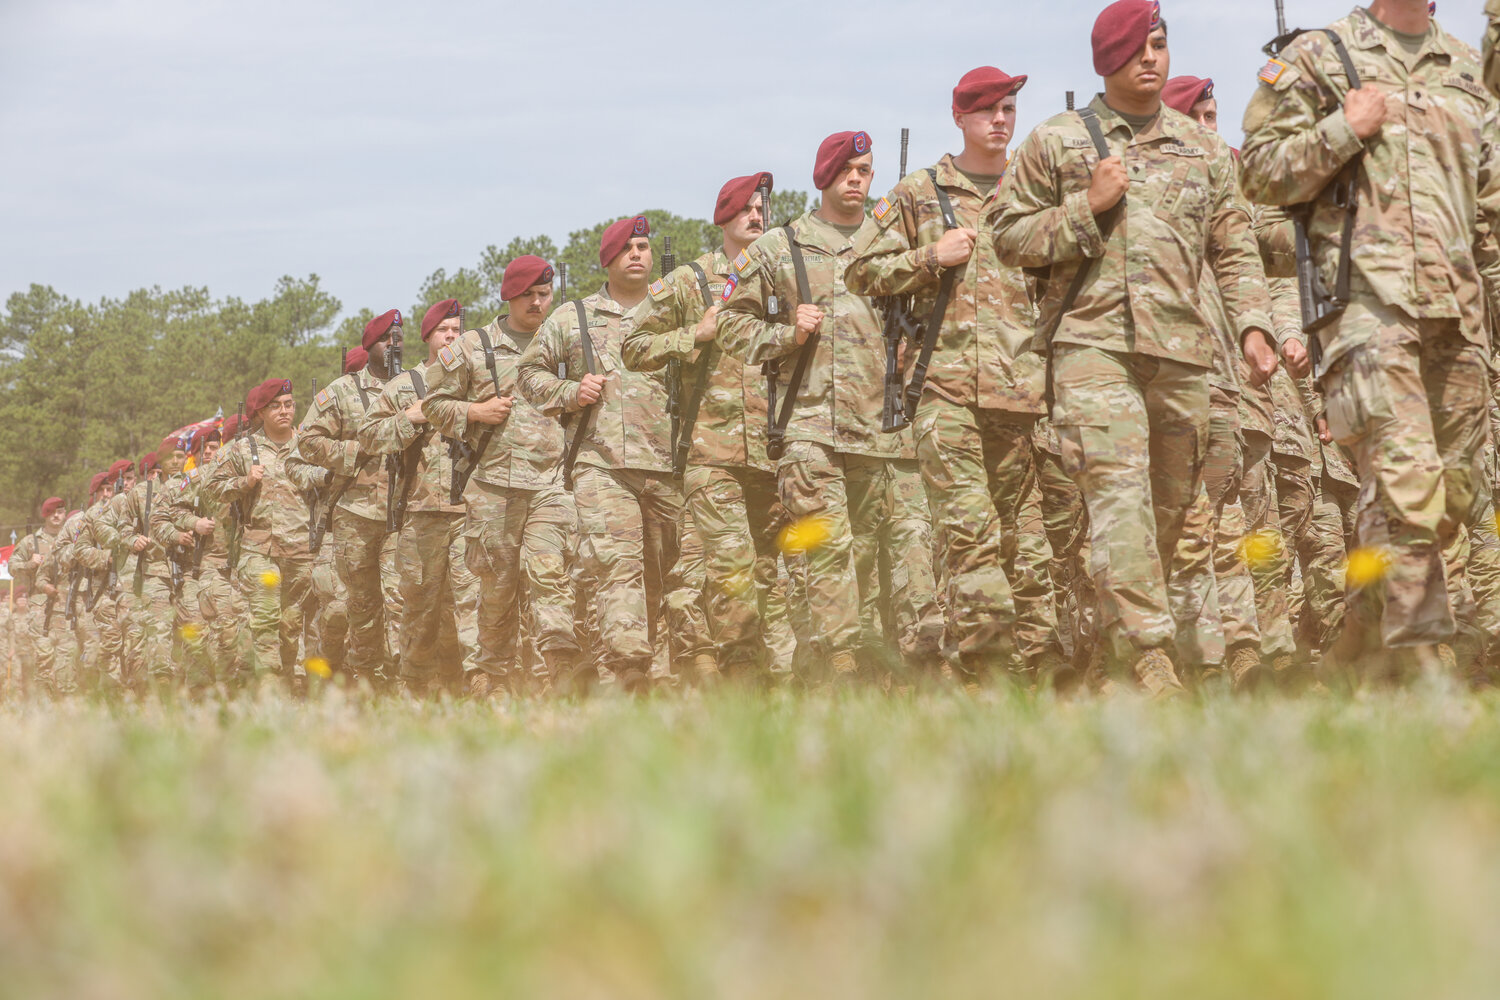 Paratroopers of the 82nd Airborne Division march during a pass-in-review ceremony on Fort Bragg on Thursday.